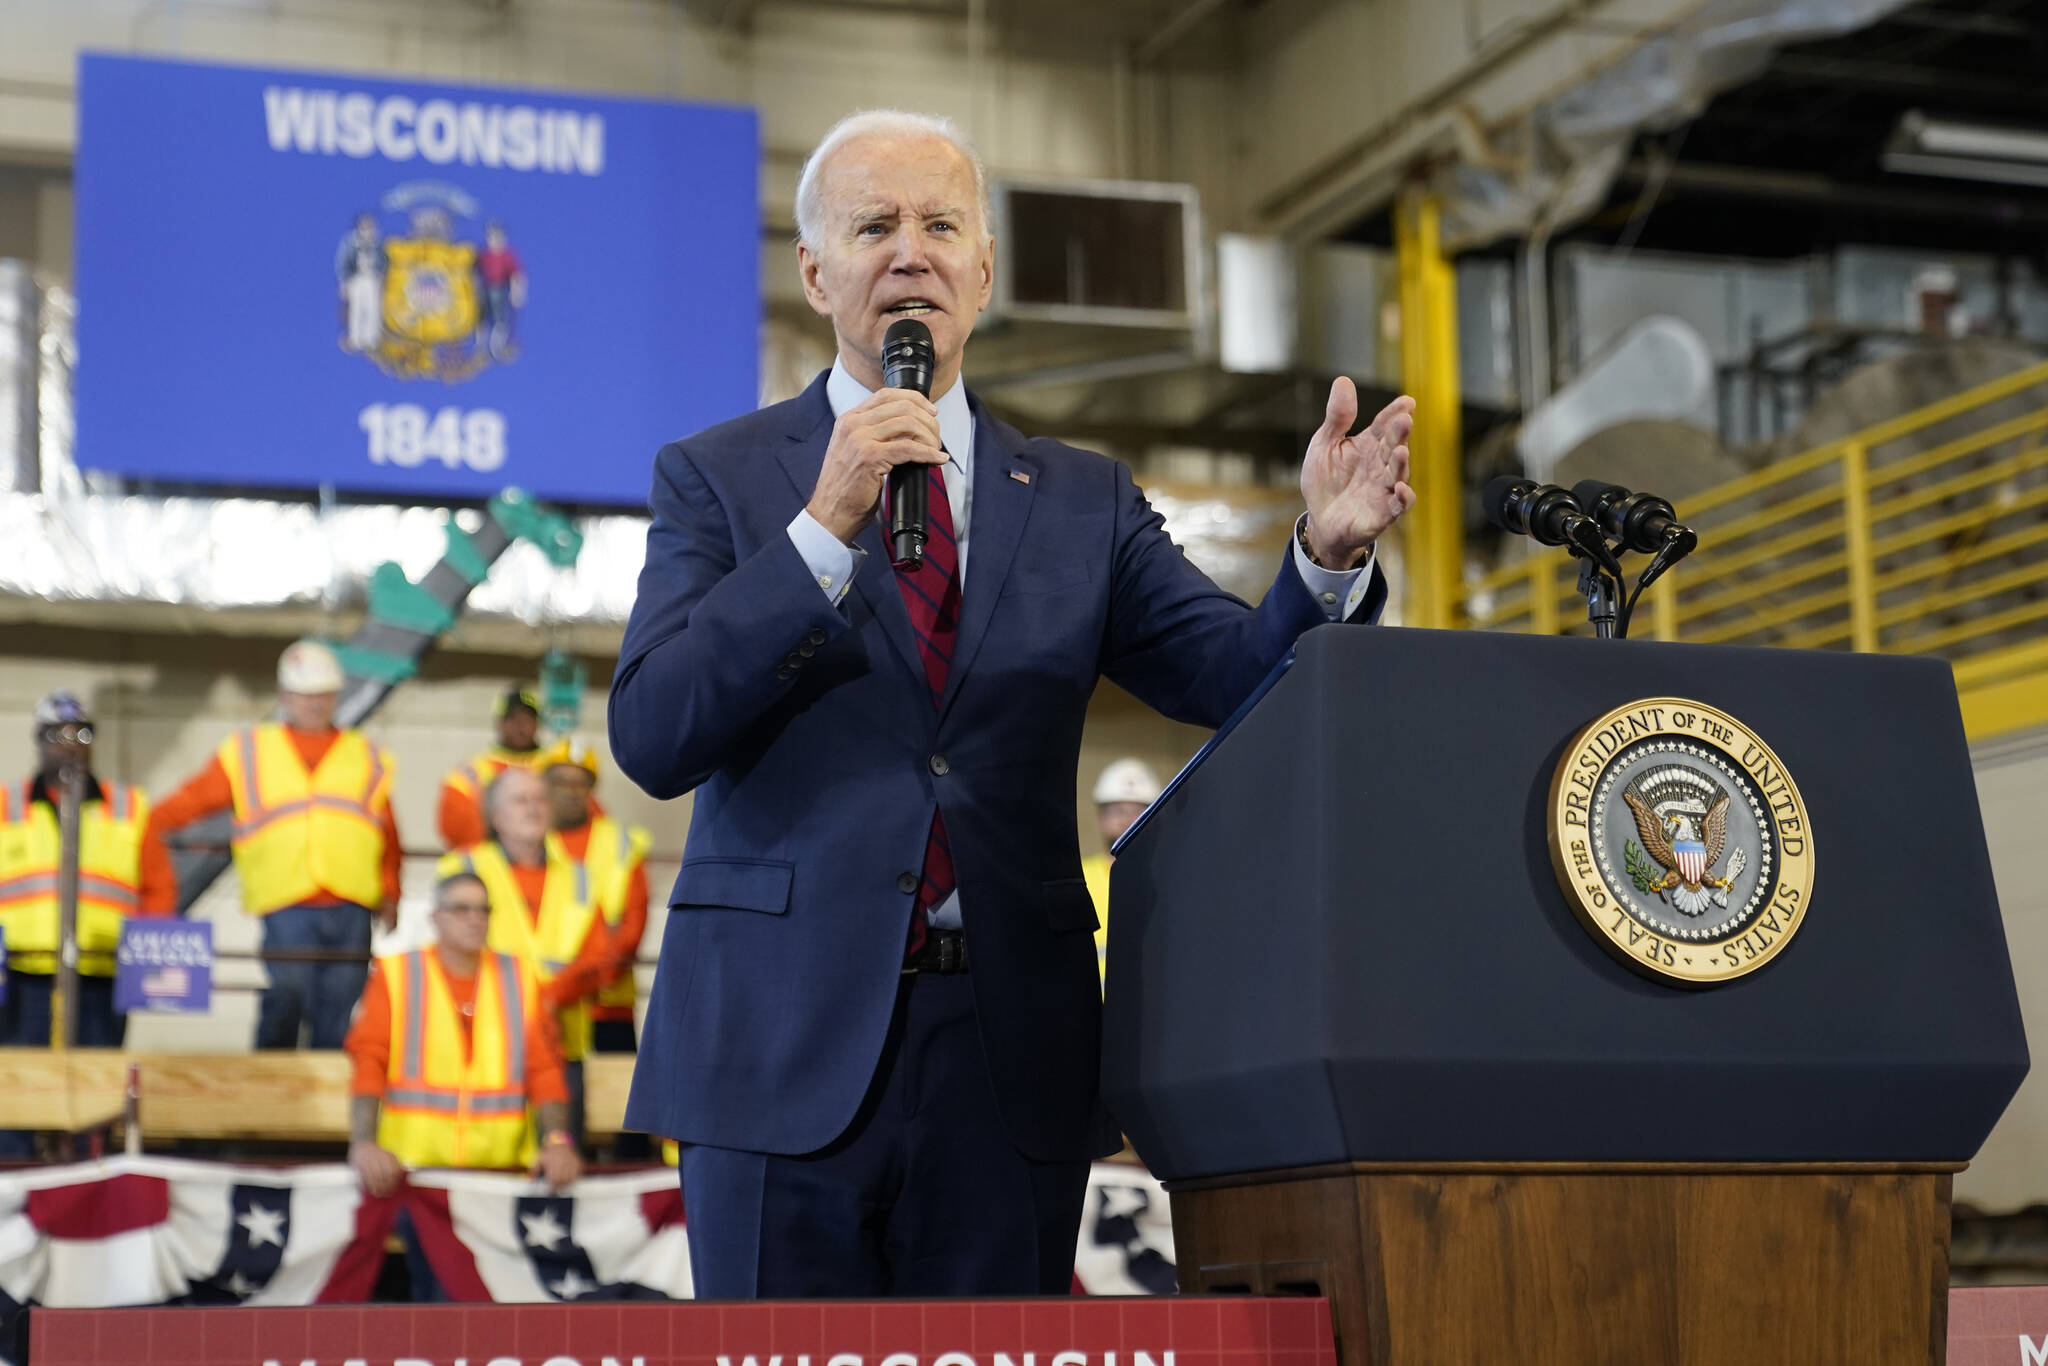 President Joe Biden speaks about his economic agenda at LIUNA Training Center, Wednesday, Feb. 8, 2023, in DeForest, Wis. Plans for entitlement programs factored heavily into his State of the Union address. (AP Photo / Patrick Semansky)